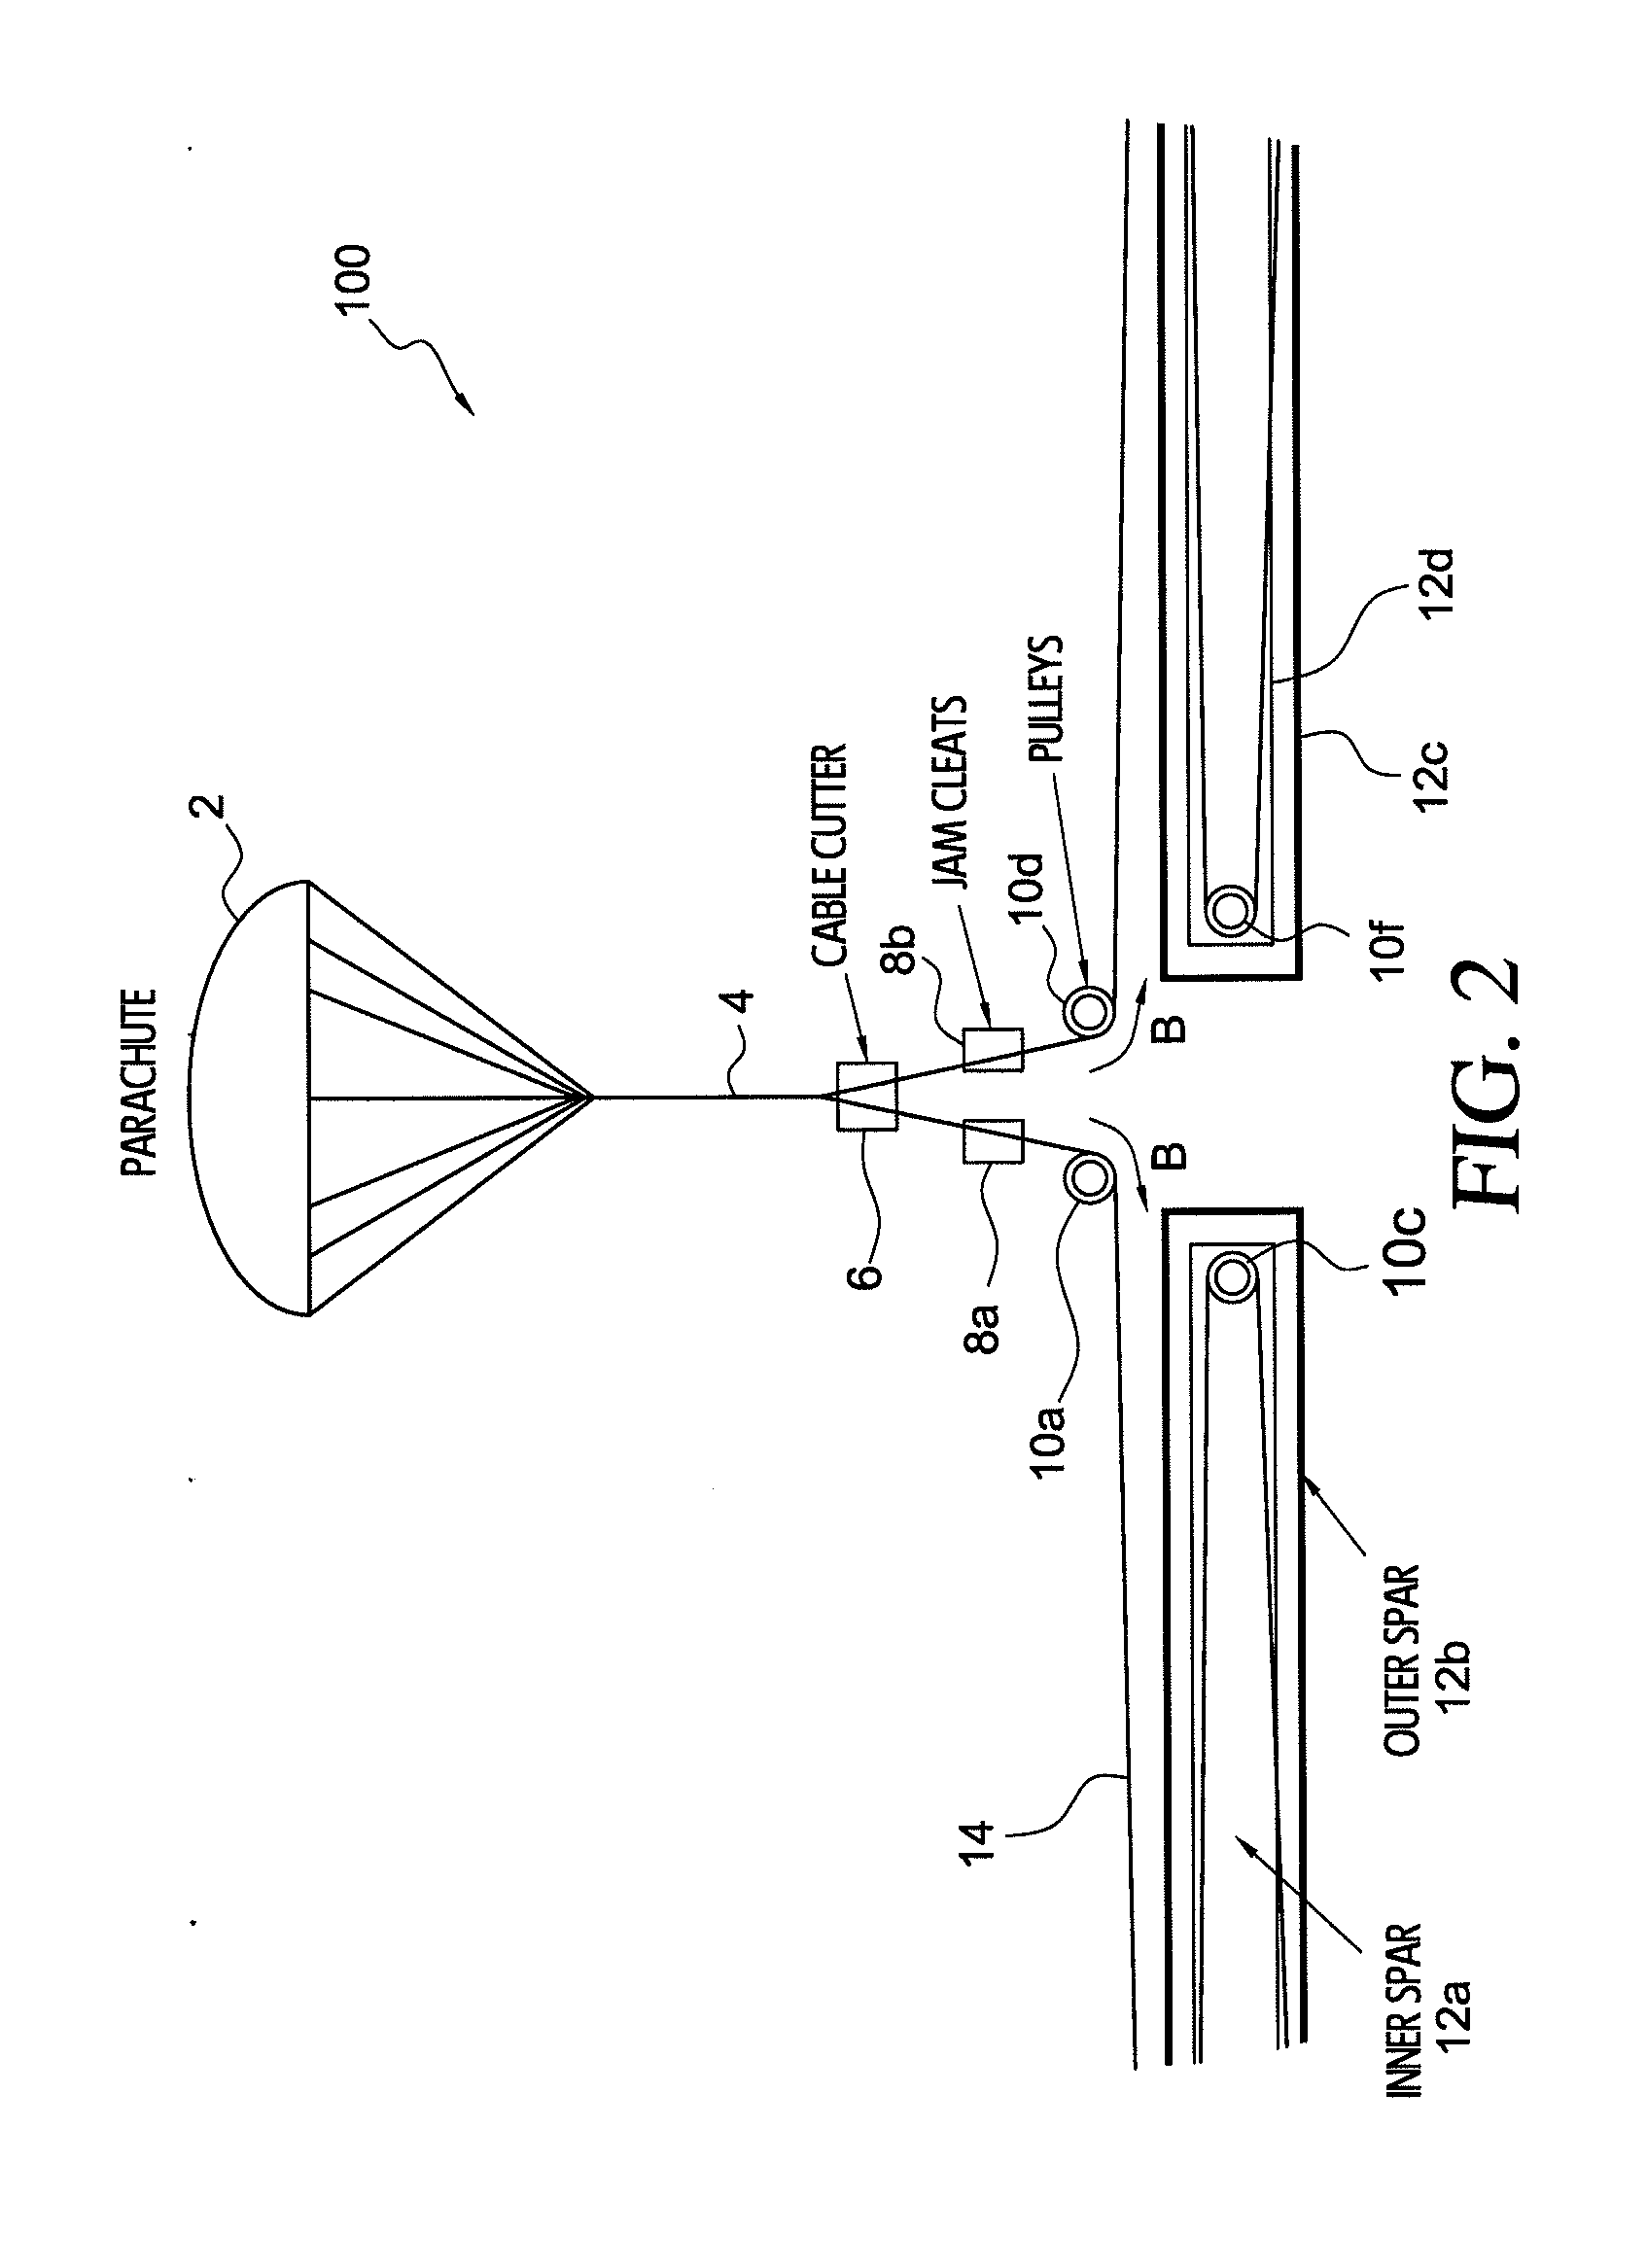 Deployment of telescoping aircraft structures by drogue parachute riser tension